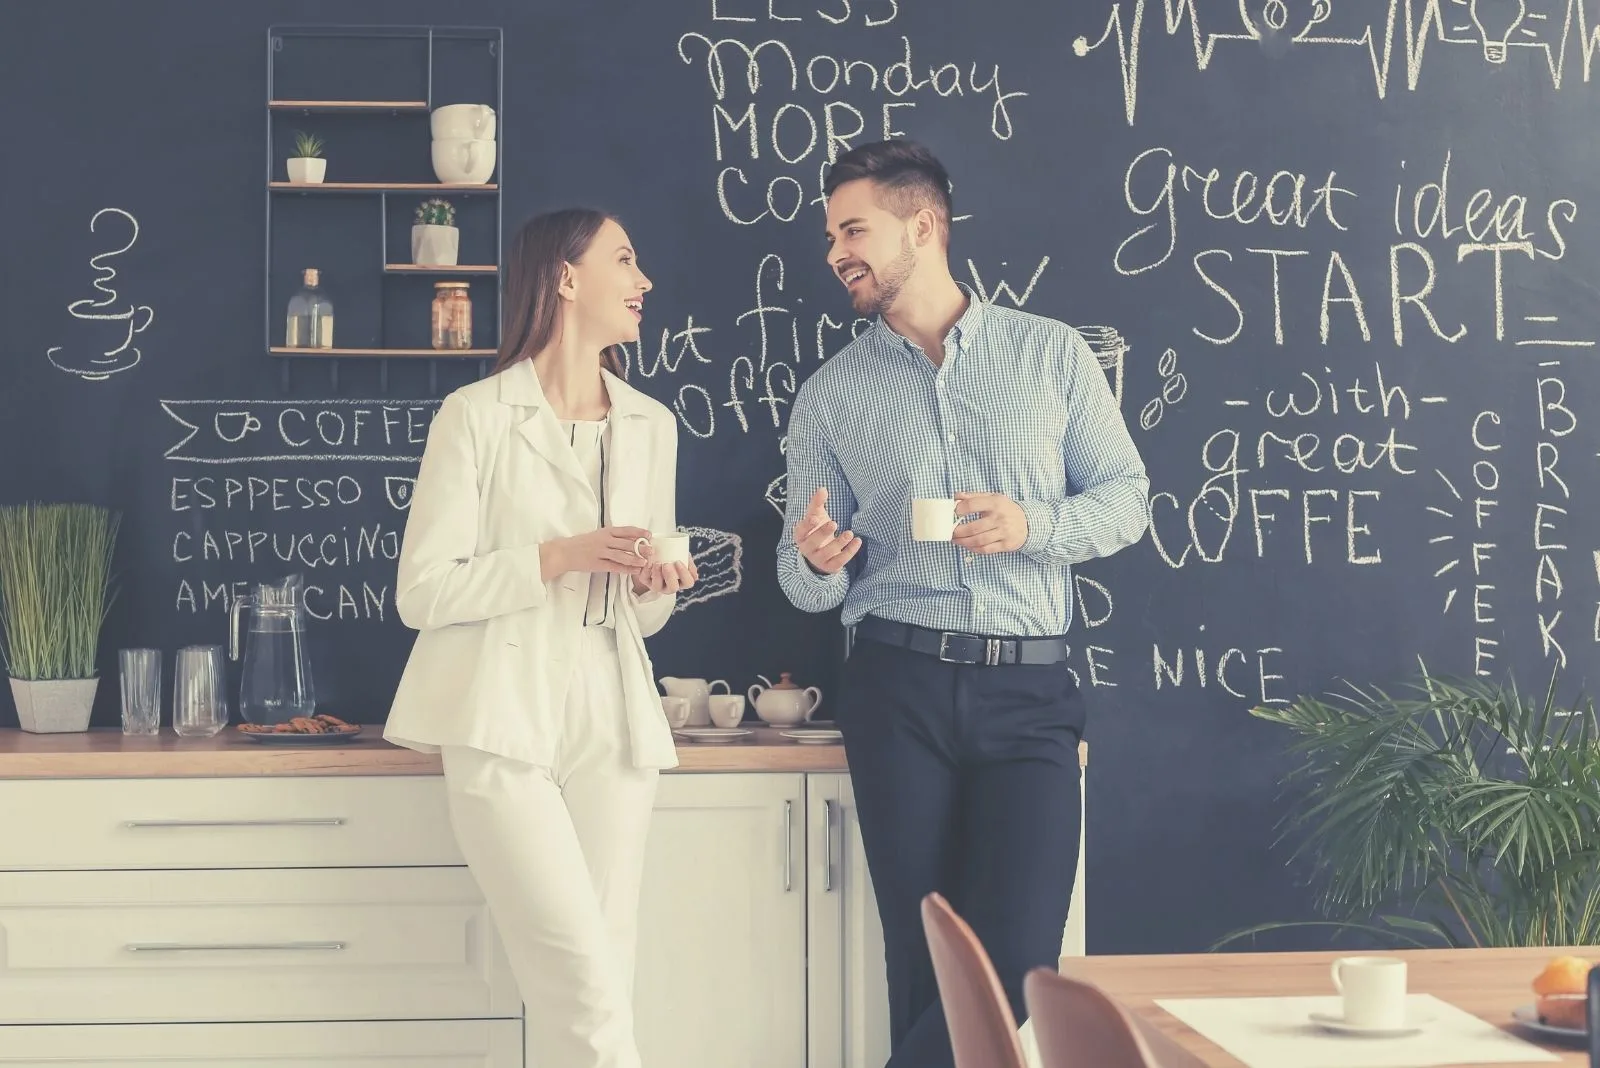 male and female workers drinking coffee in the pantry during their break